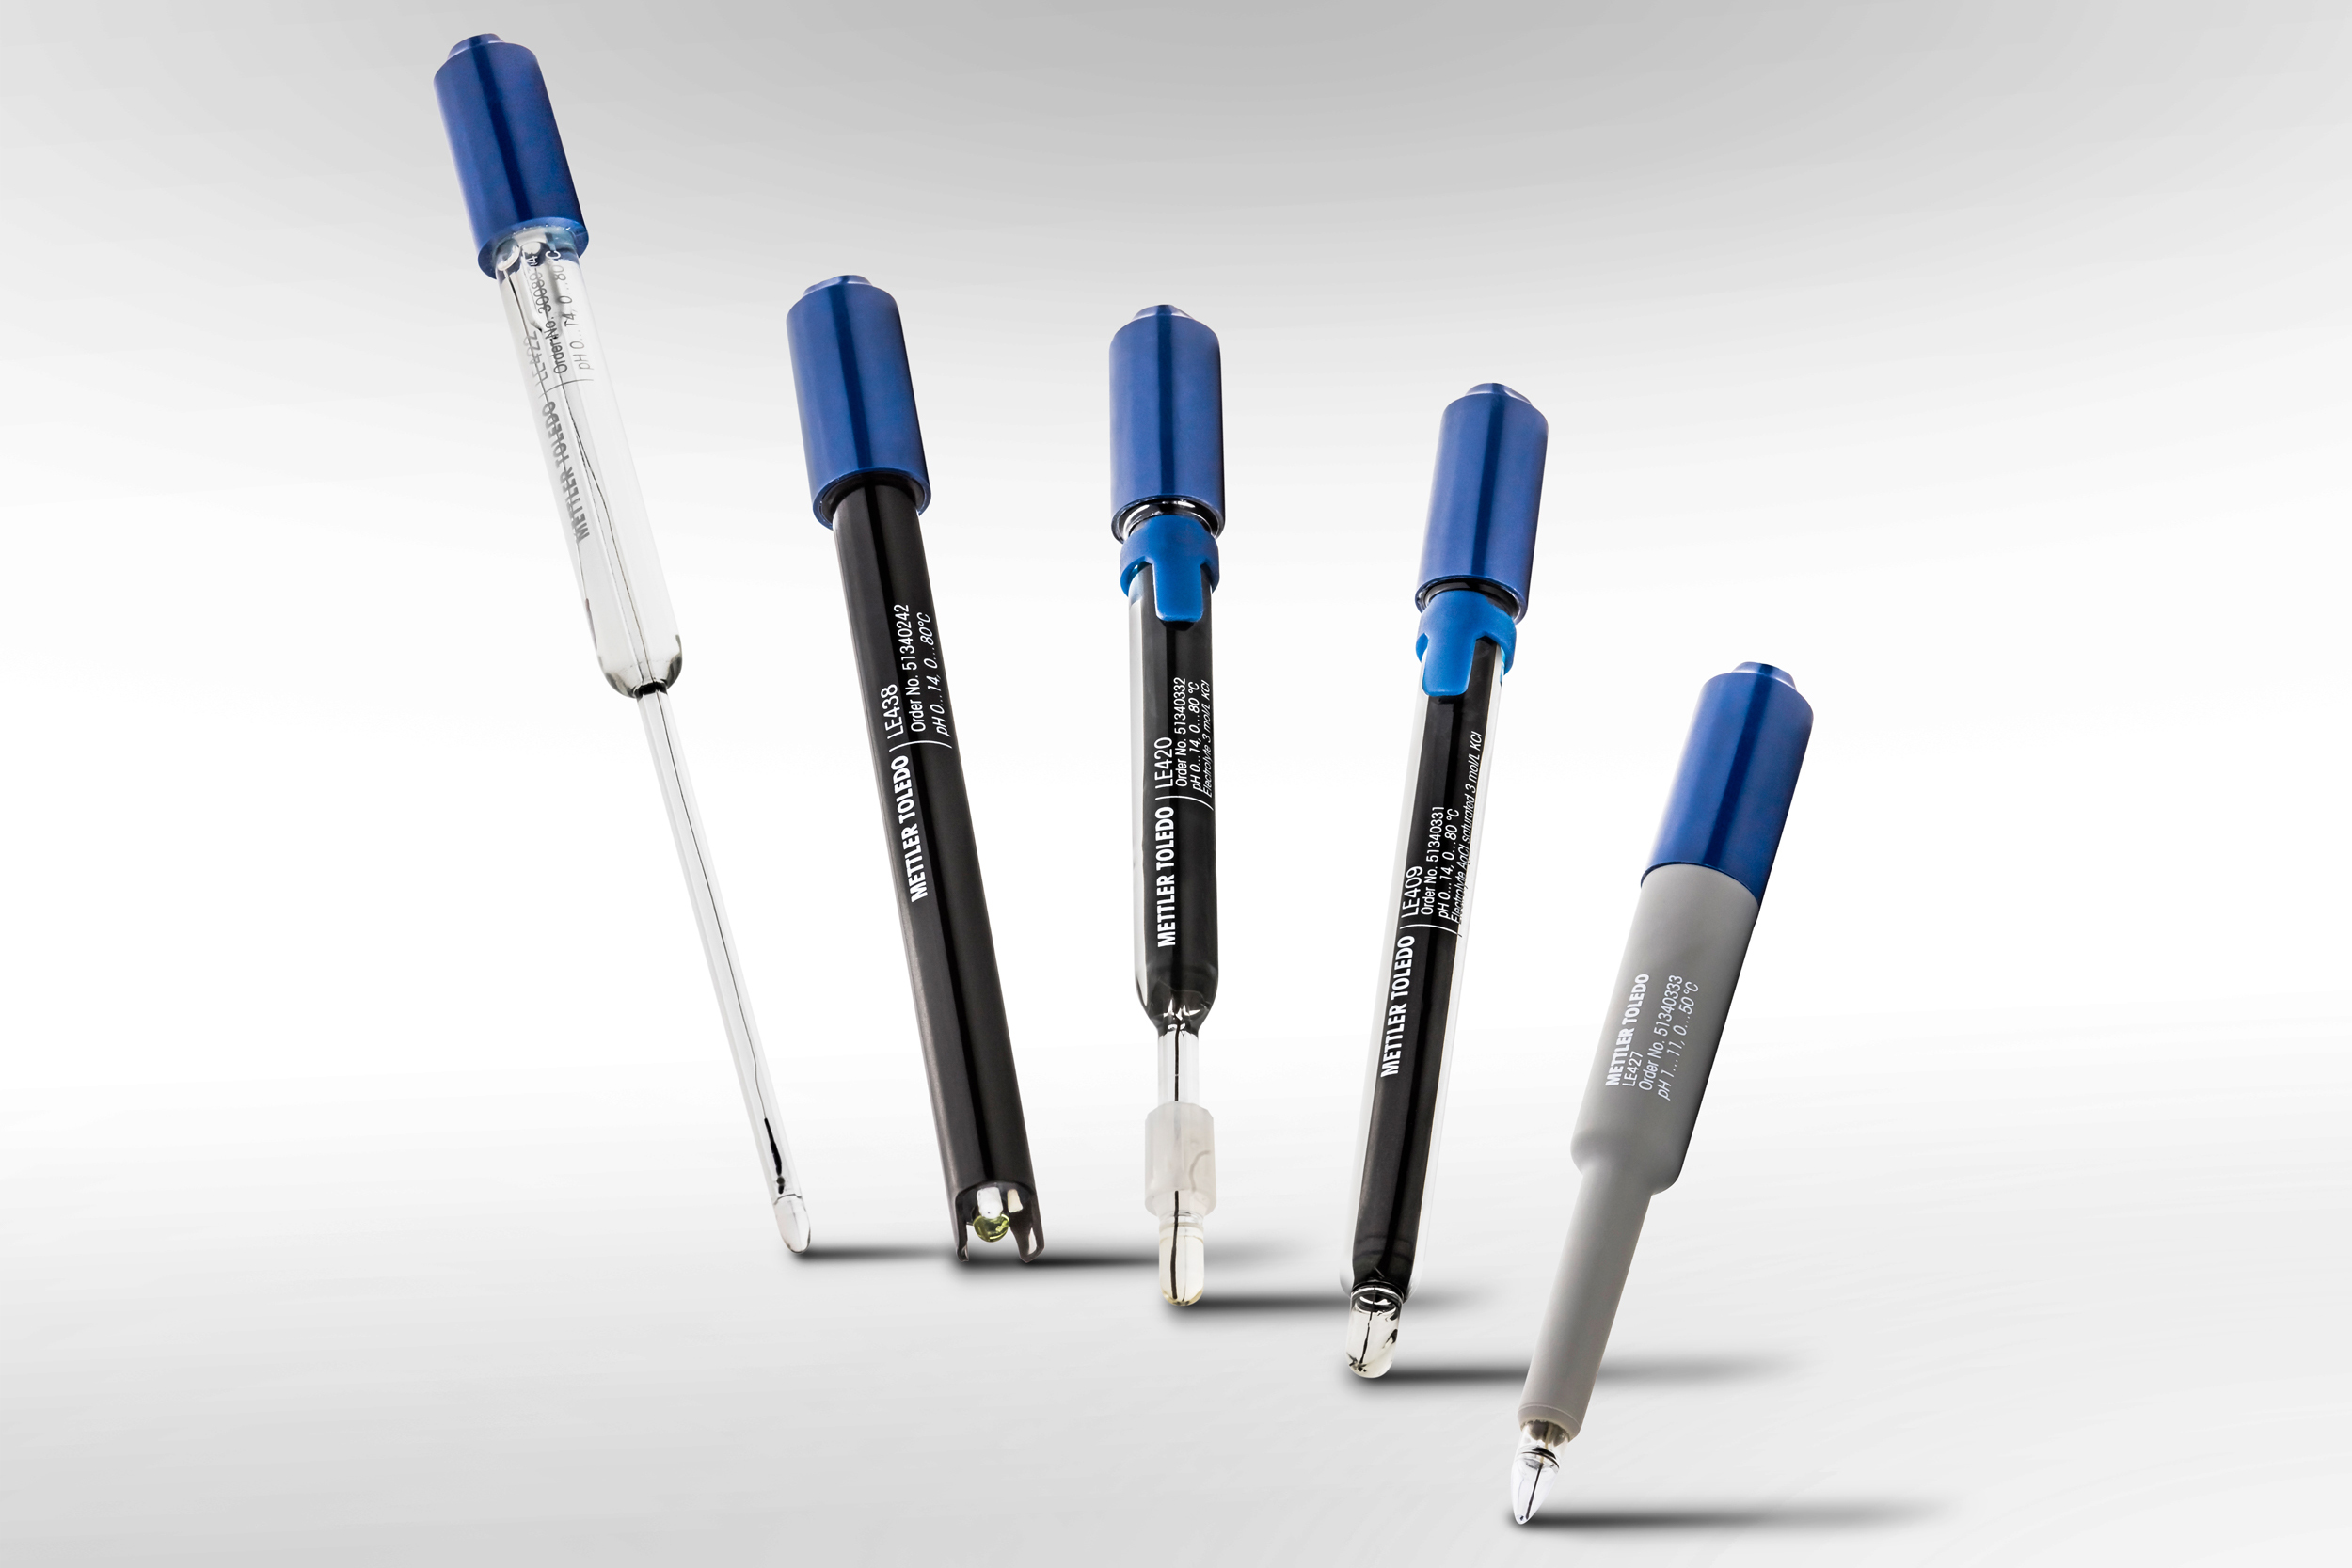 Mettler Toledo InLab sensors for pH, conductivity, ion, dissolved oxygen and ORP.